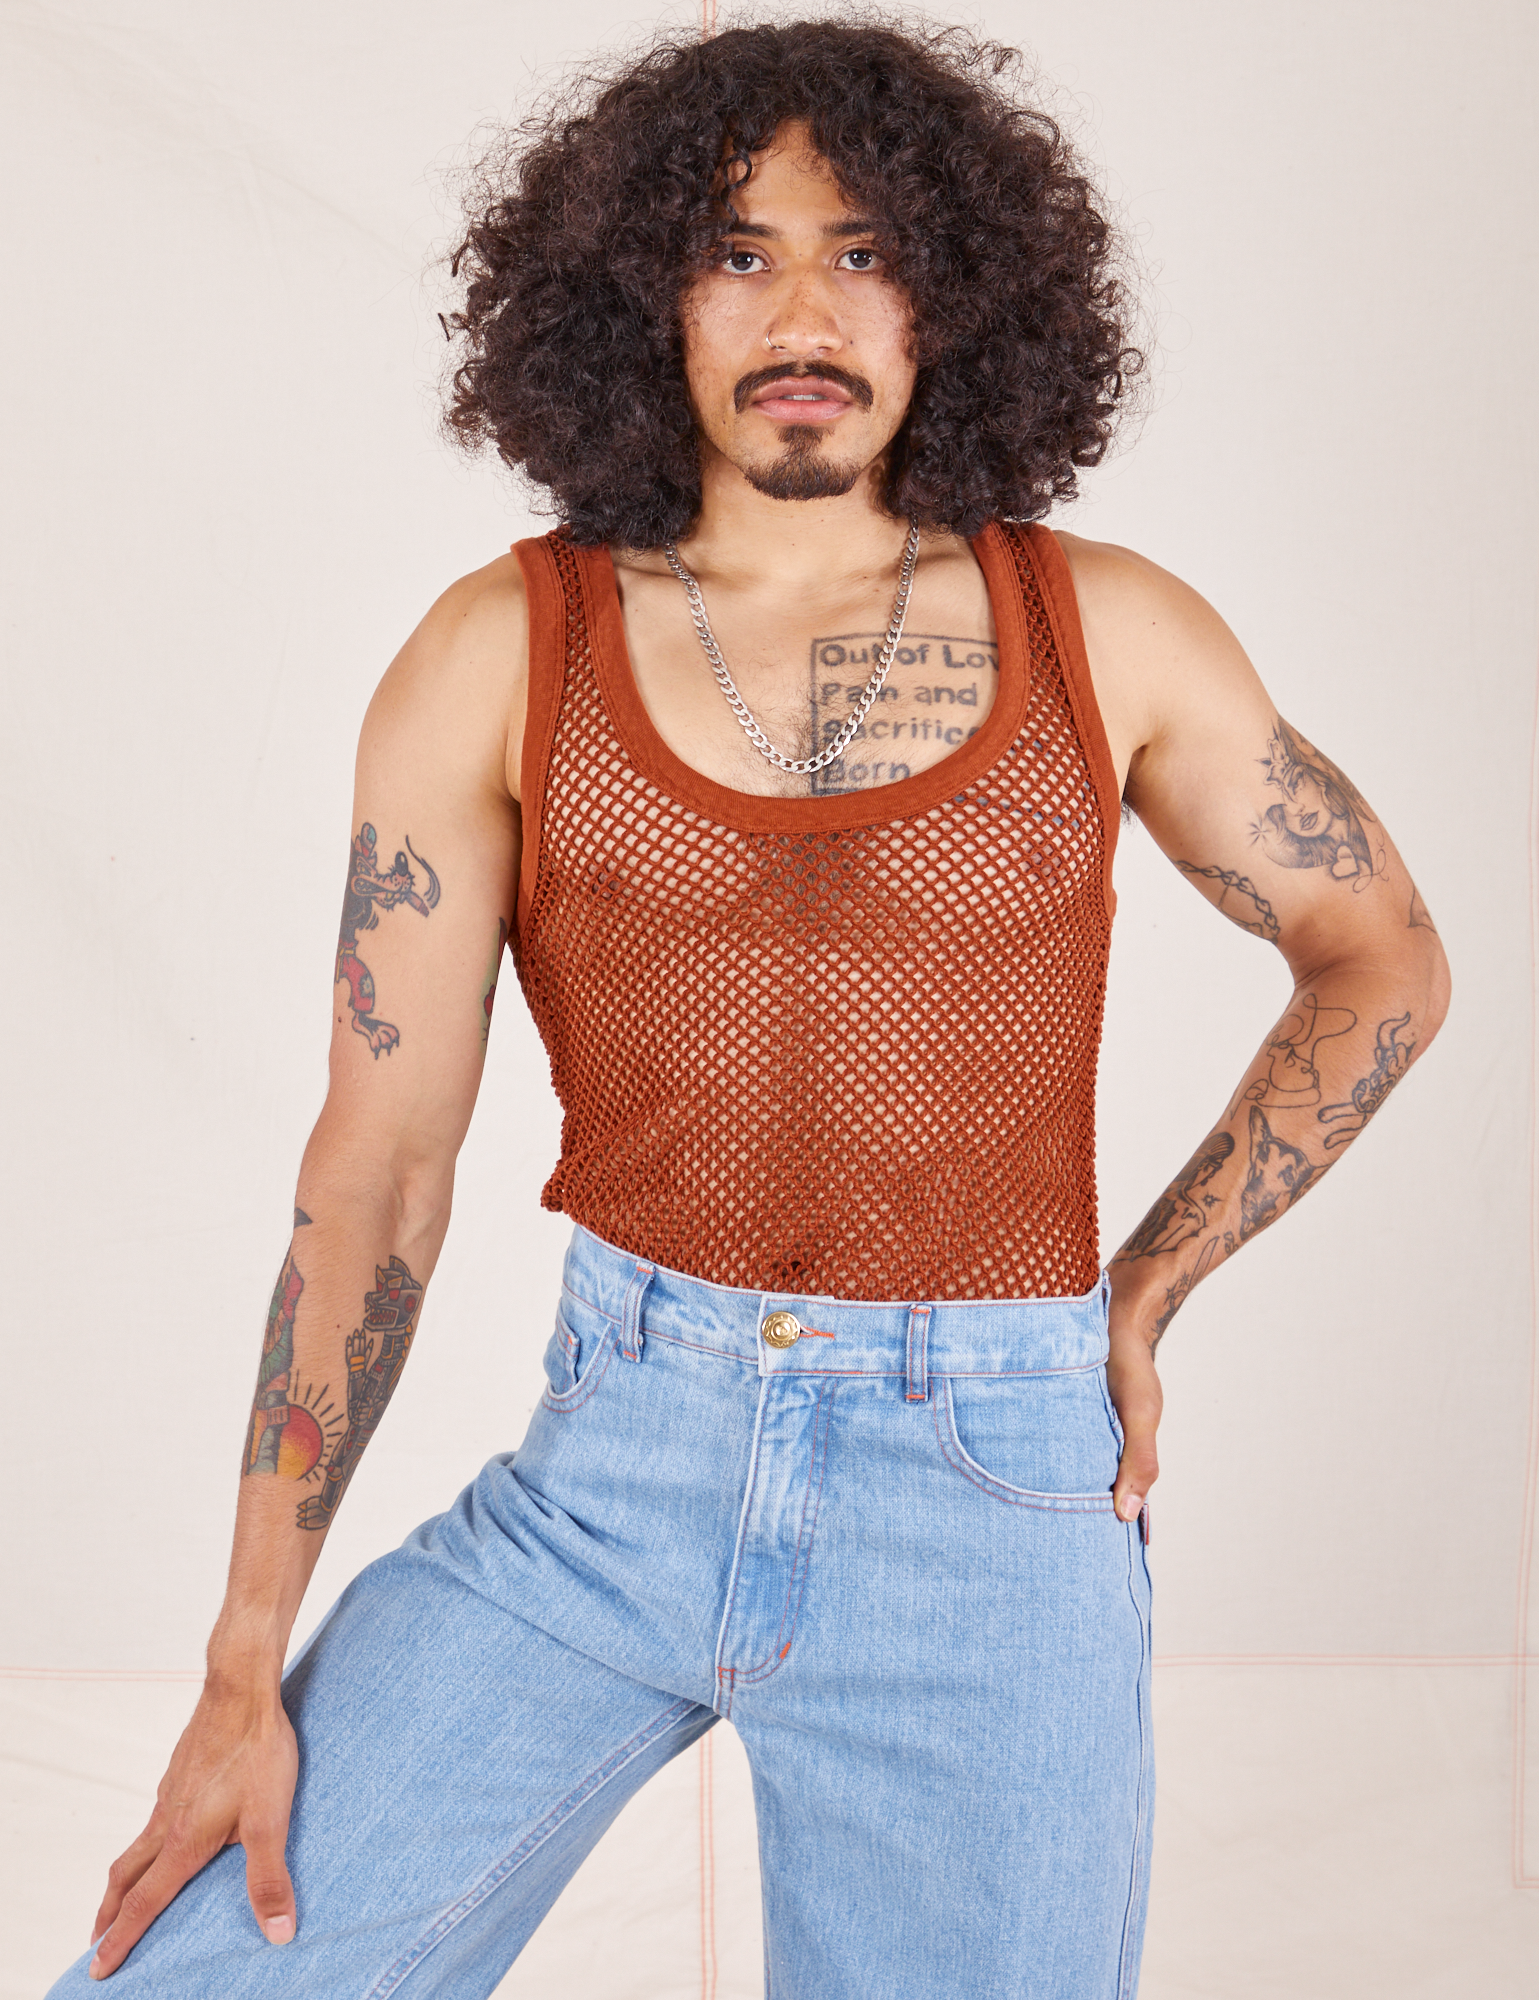 Jesse is wearing Mesh Tank Top in Burnt Terracotta and light wash Sailor Jeans